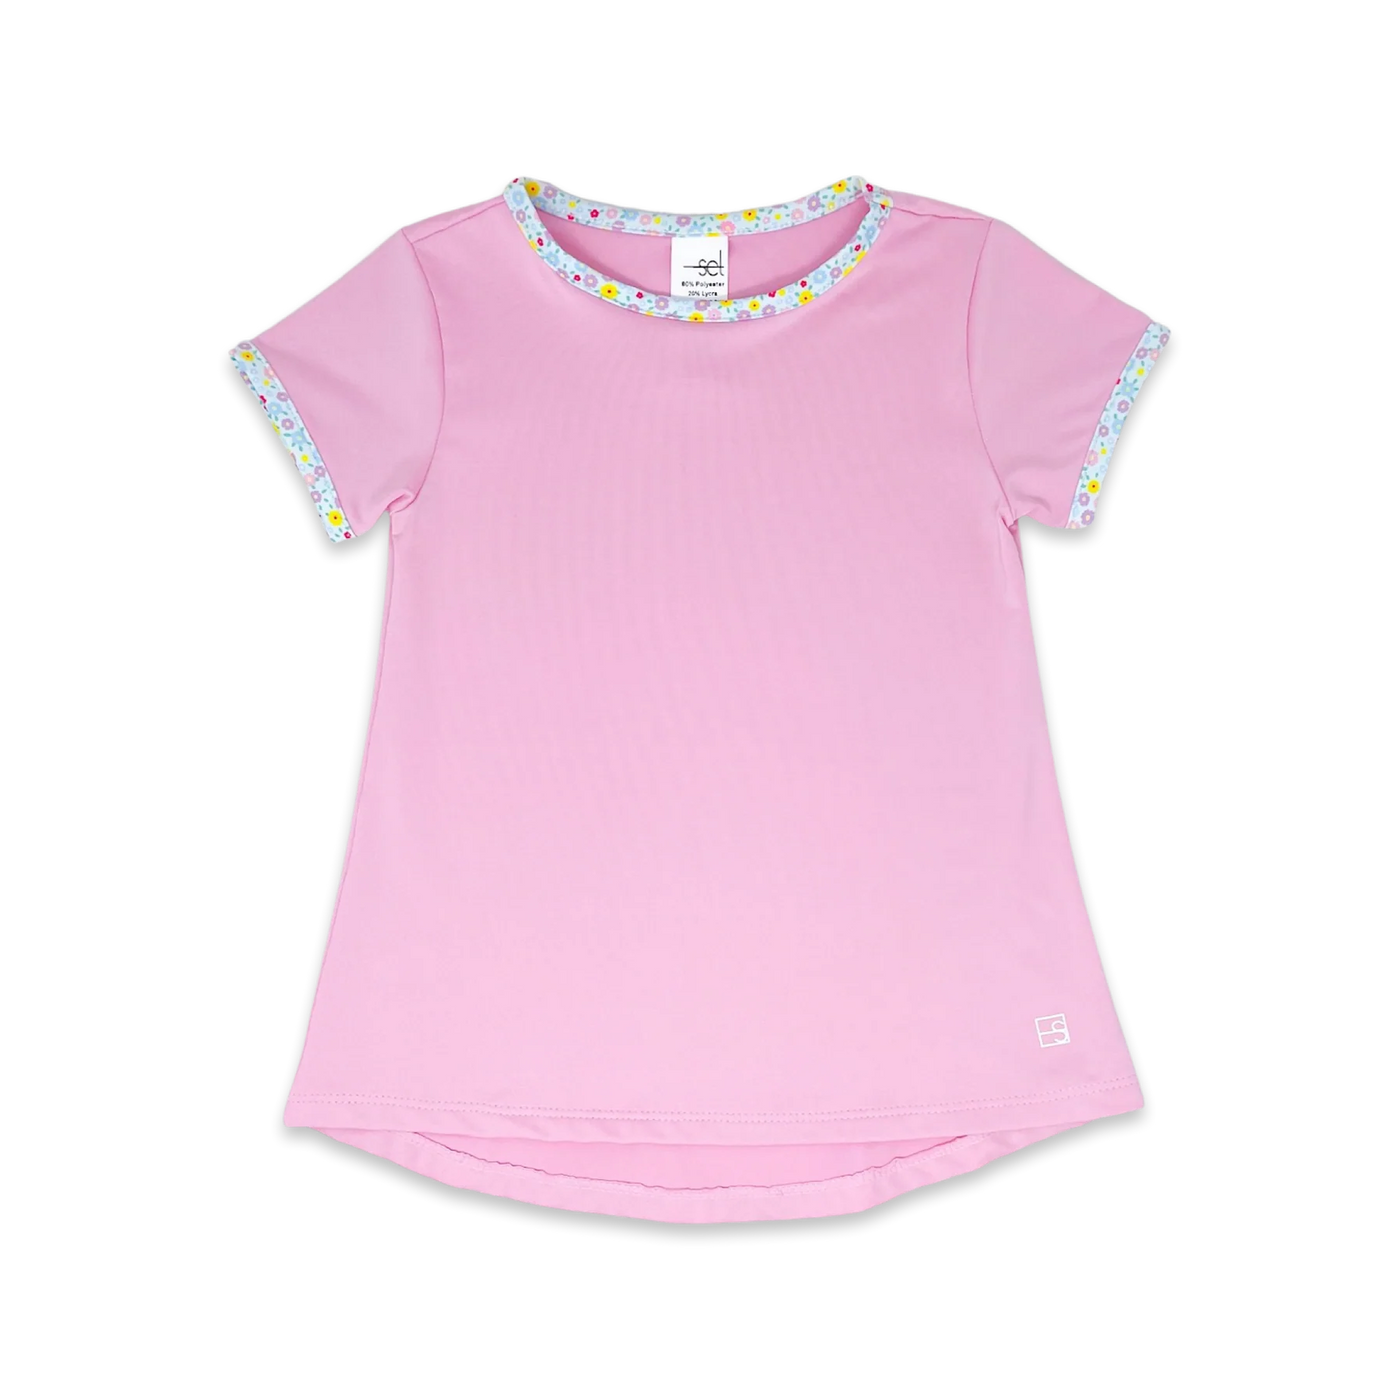 Cotton Candy Pink with Itsy Bitsy Floral Bridget Basic Tee